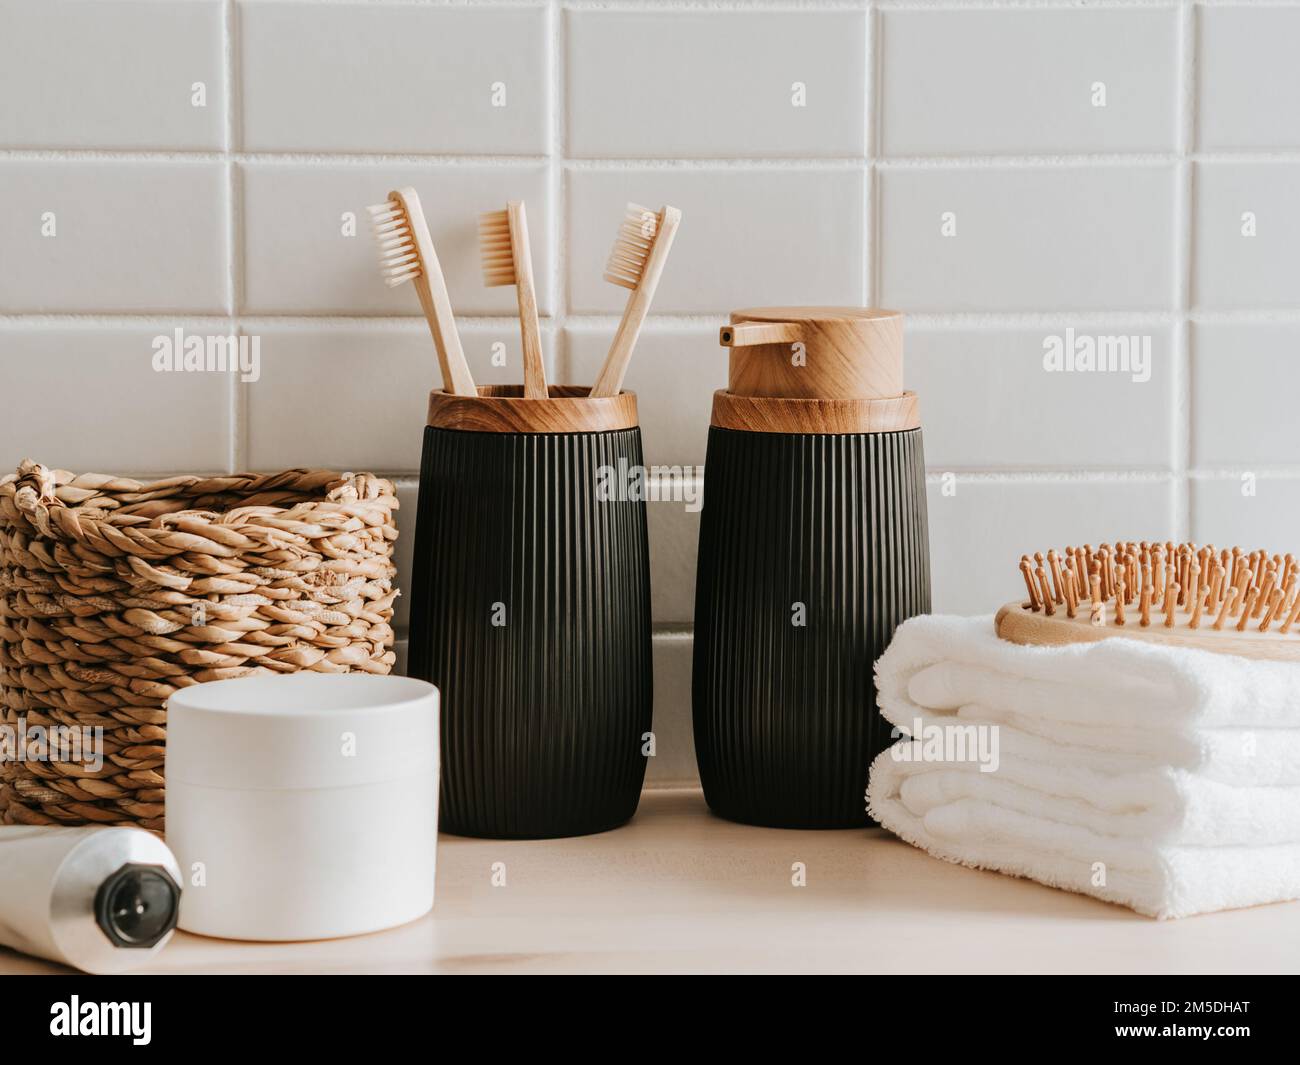 https://c8.alamy.com/comp/2M5DHAT/bath-background-front-view-with-straw-box-container-with-toothbrushes-dispenser-cosmetics-wood-comb-and-white-towels-on-white-background-front-vi-2M5DHAT.jpg